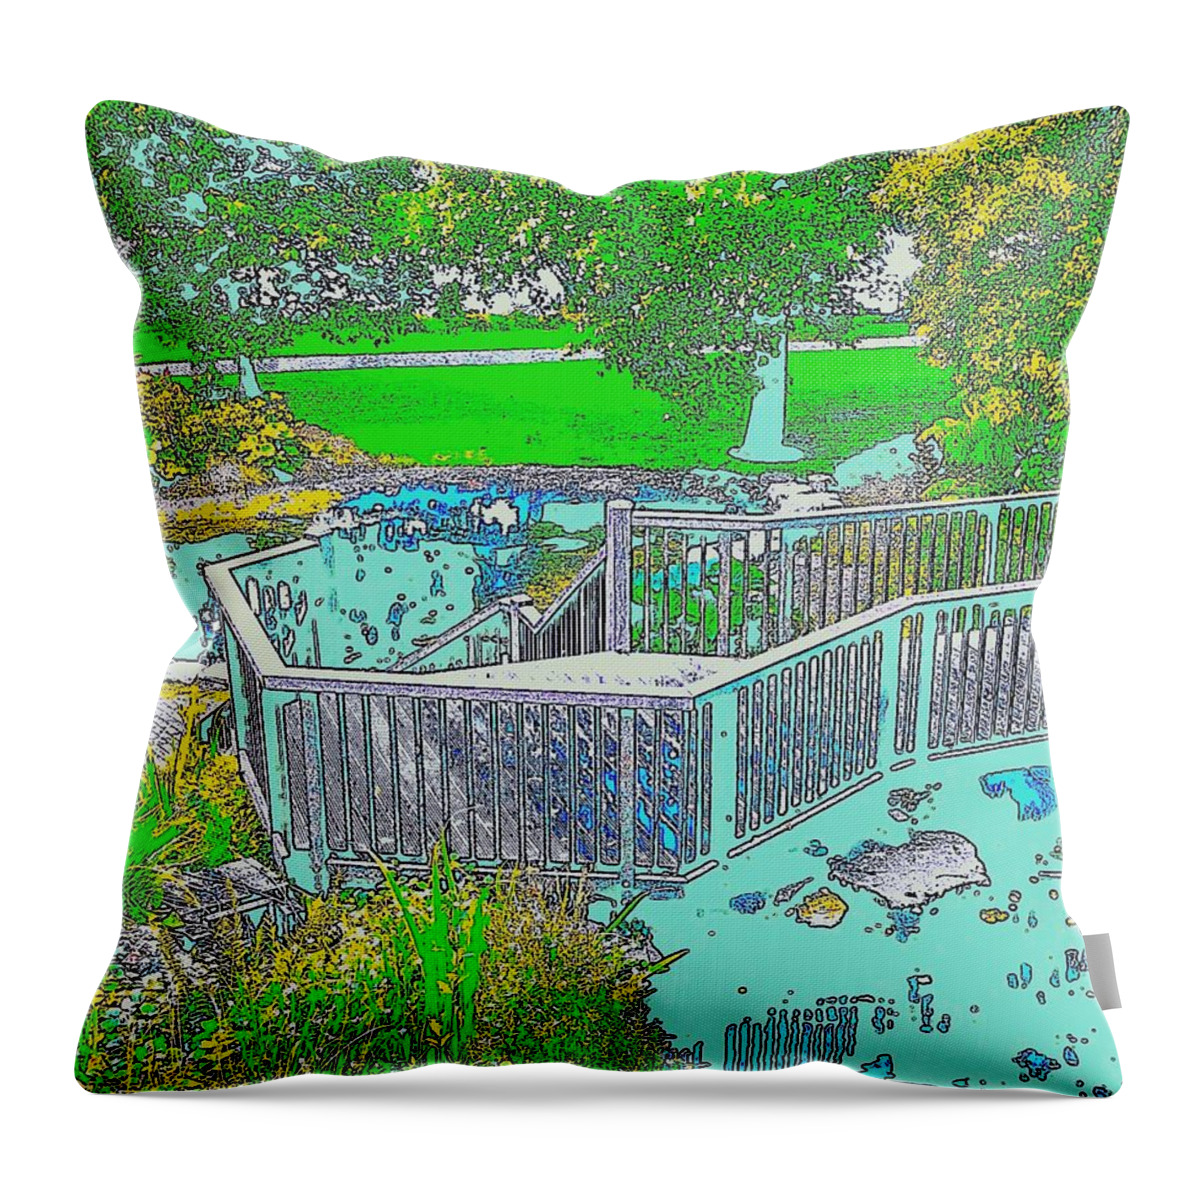 Landscape Throw Pillow featuring the digital art Picnic Time by Lessandra Grimley